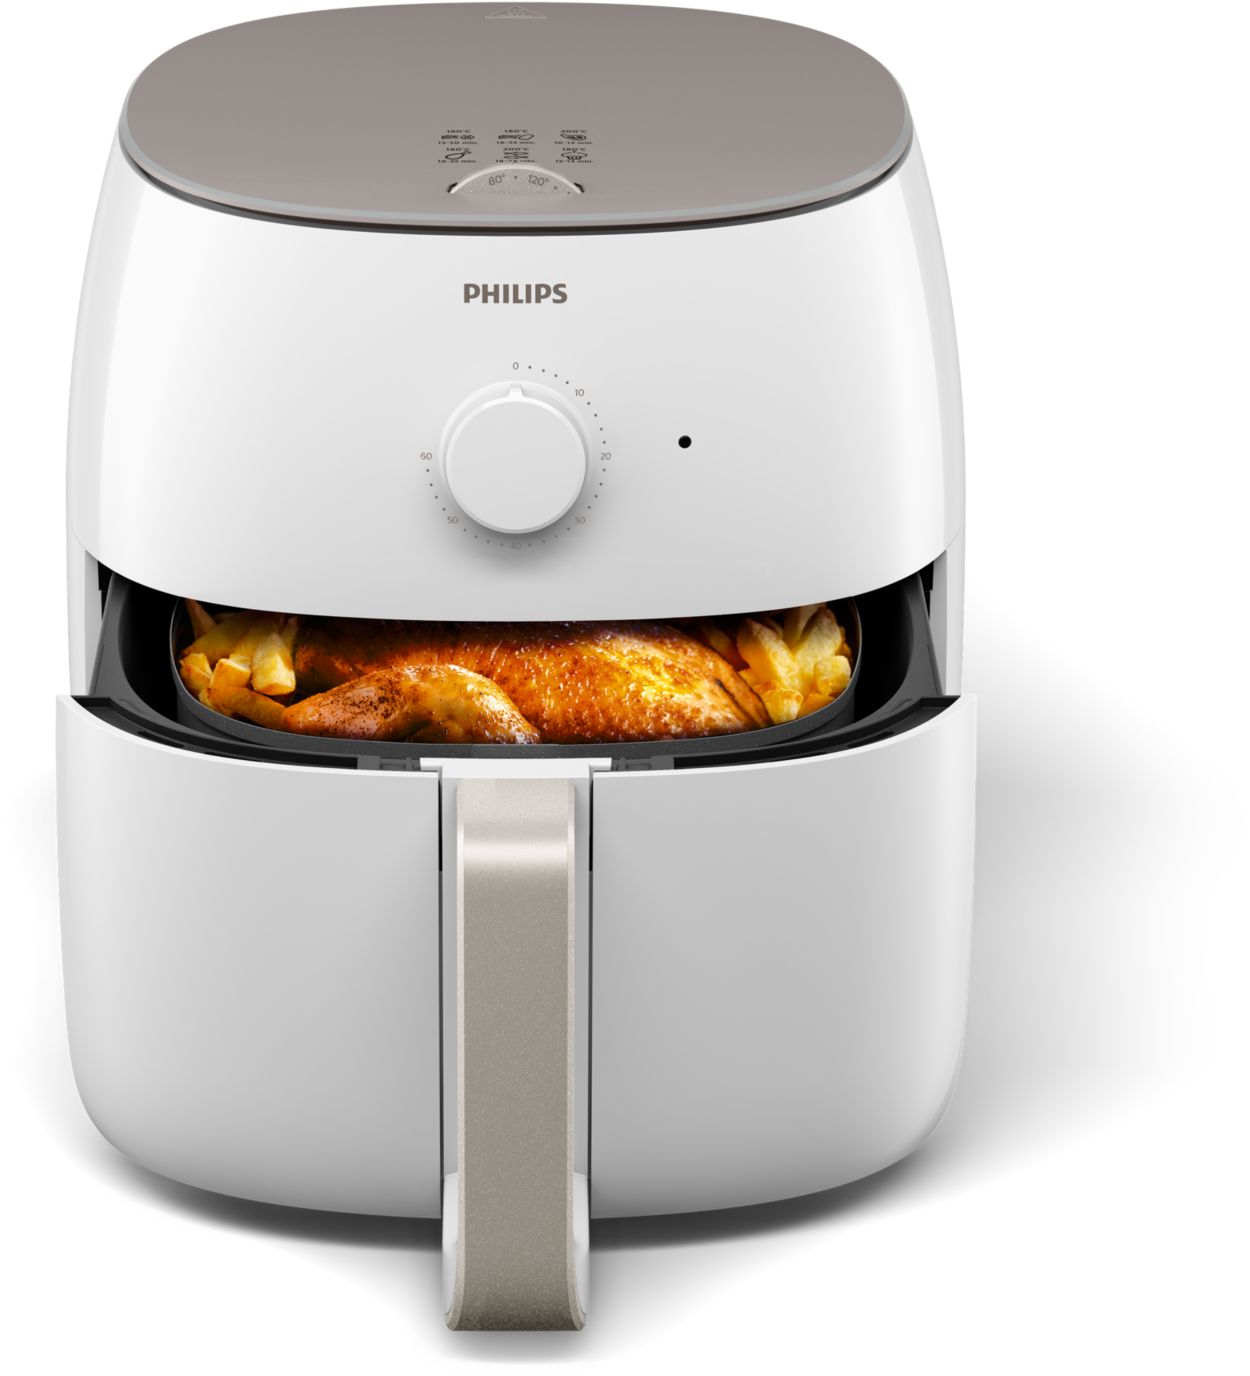 Philips Premium Airfryer XXL review: Large in more than just name